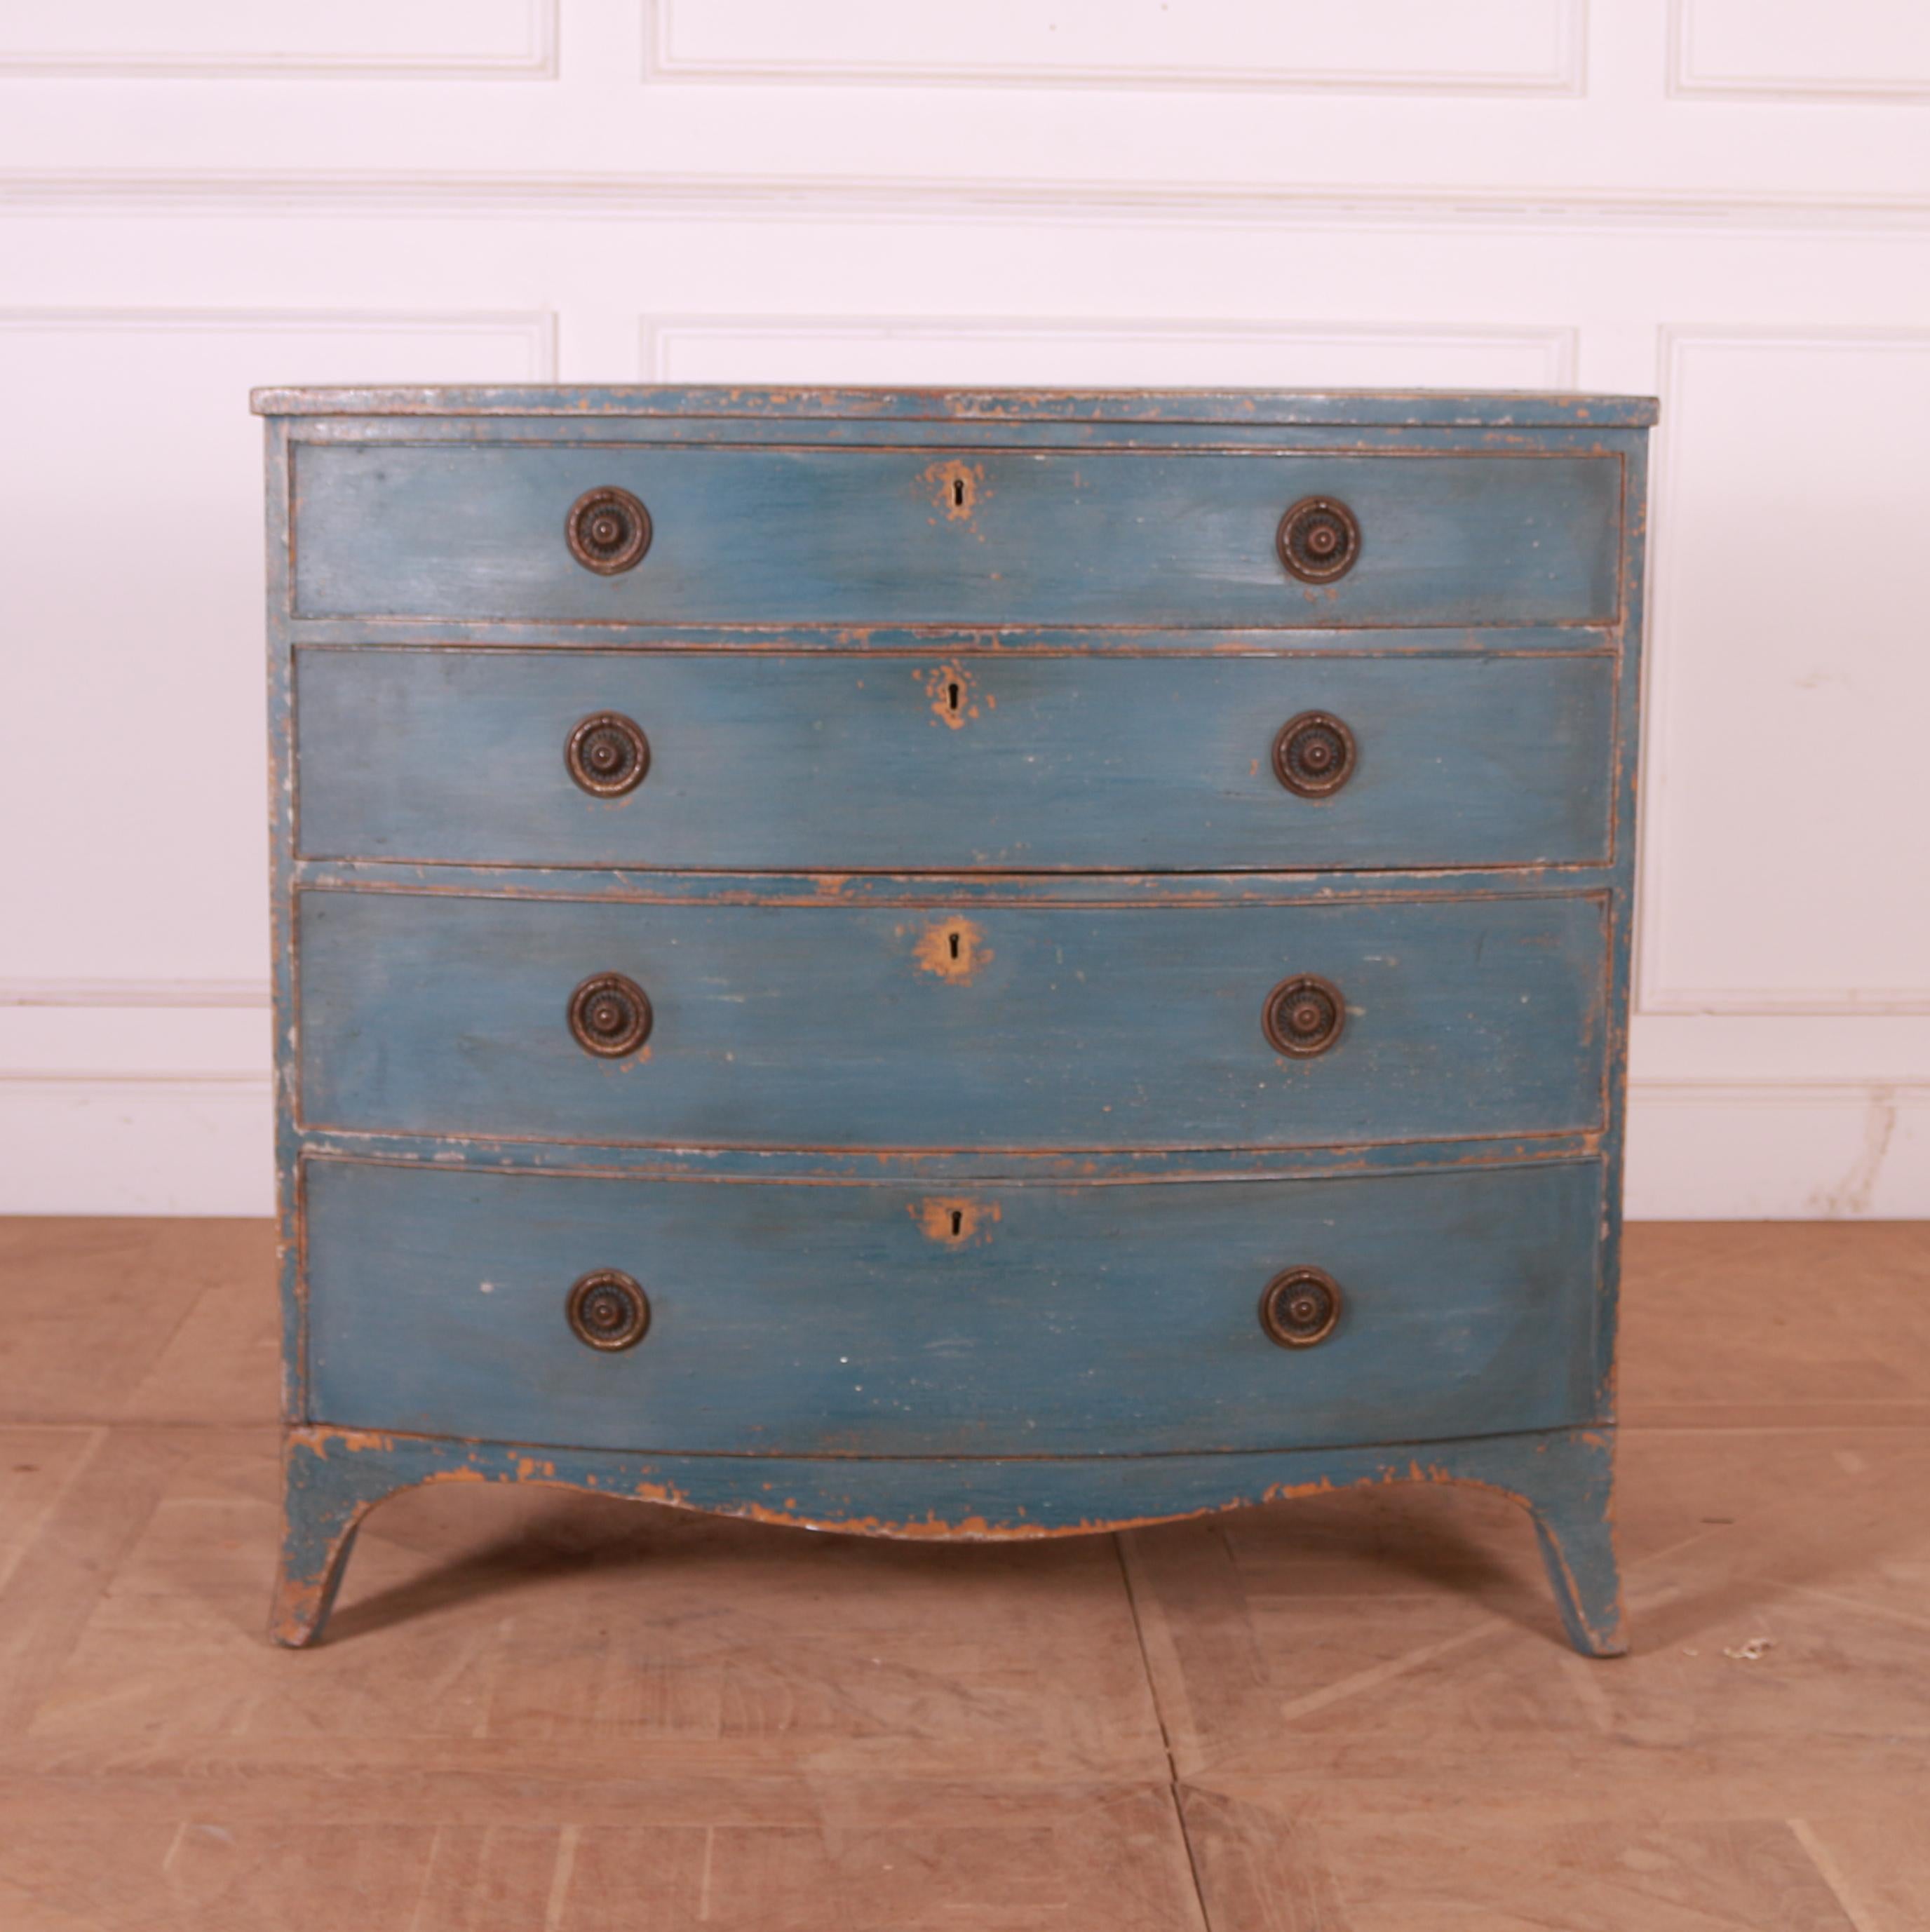 Good early 19th century English painted pine bowfront chest of drawers. 1820.

Reference: 7748

Dimensions
42 inches (107 cms) wide
23 inches (58 cms) deep
38 inches (97 cms) high.